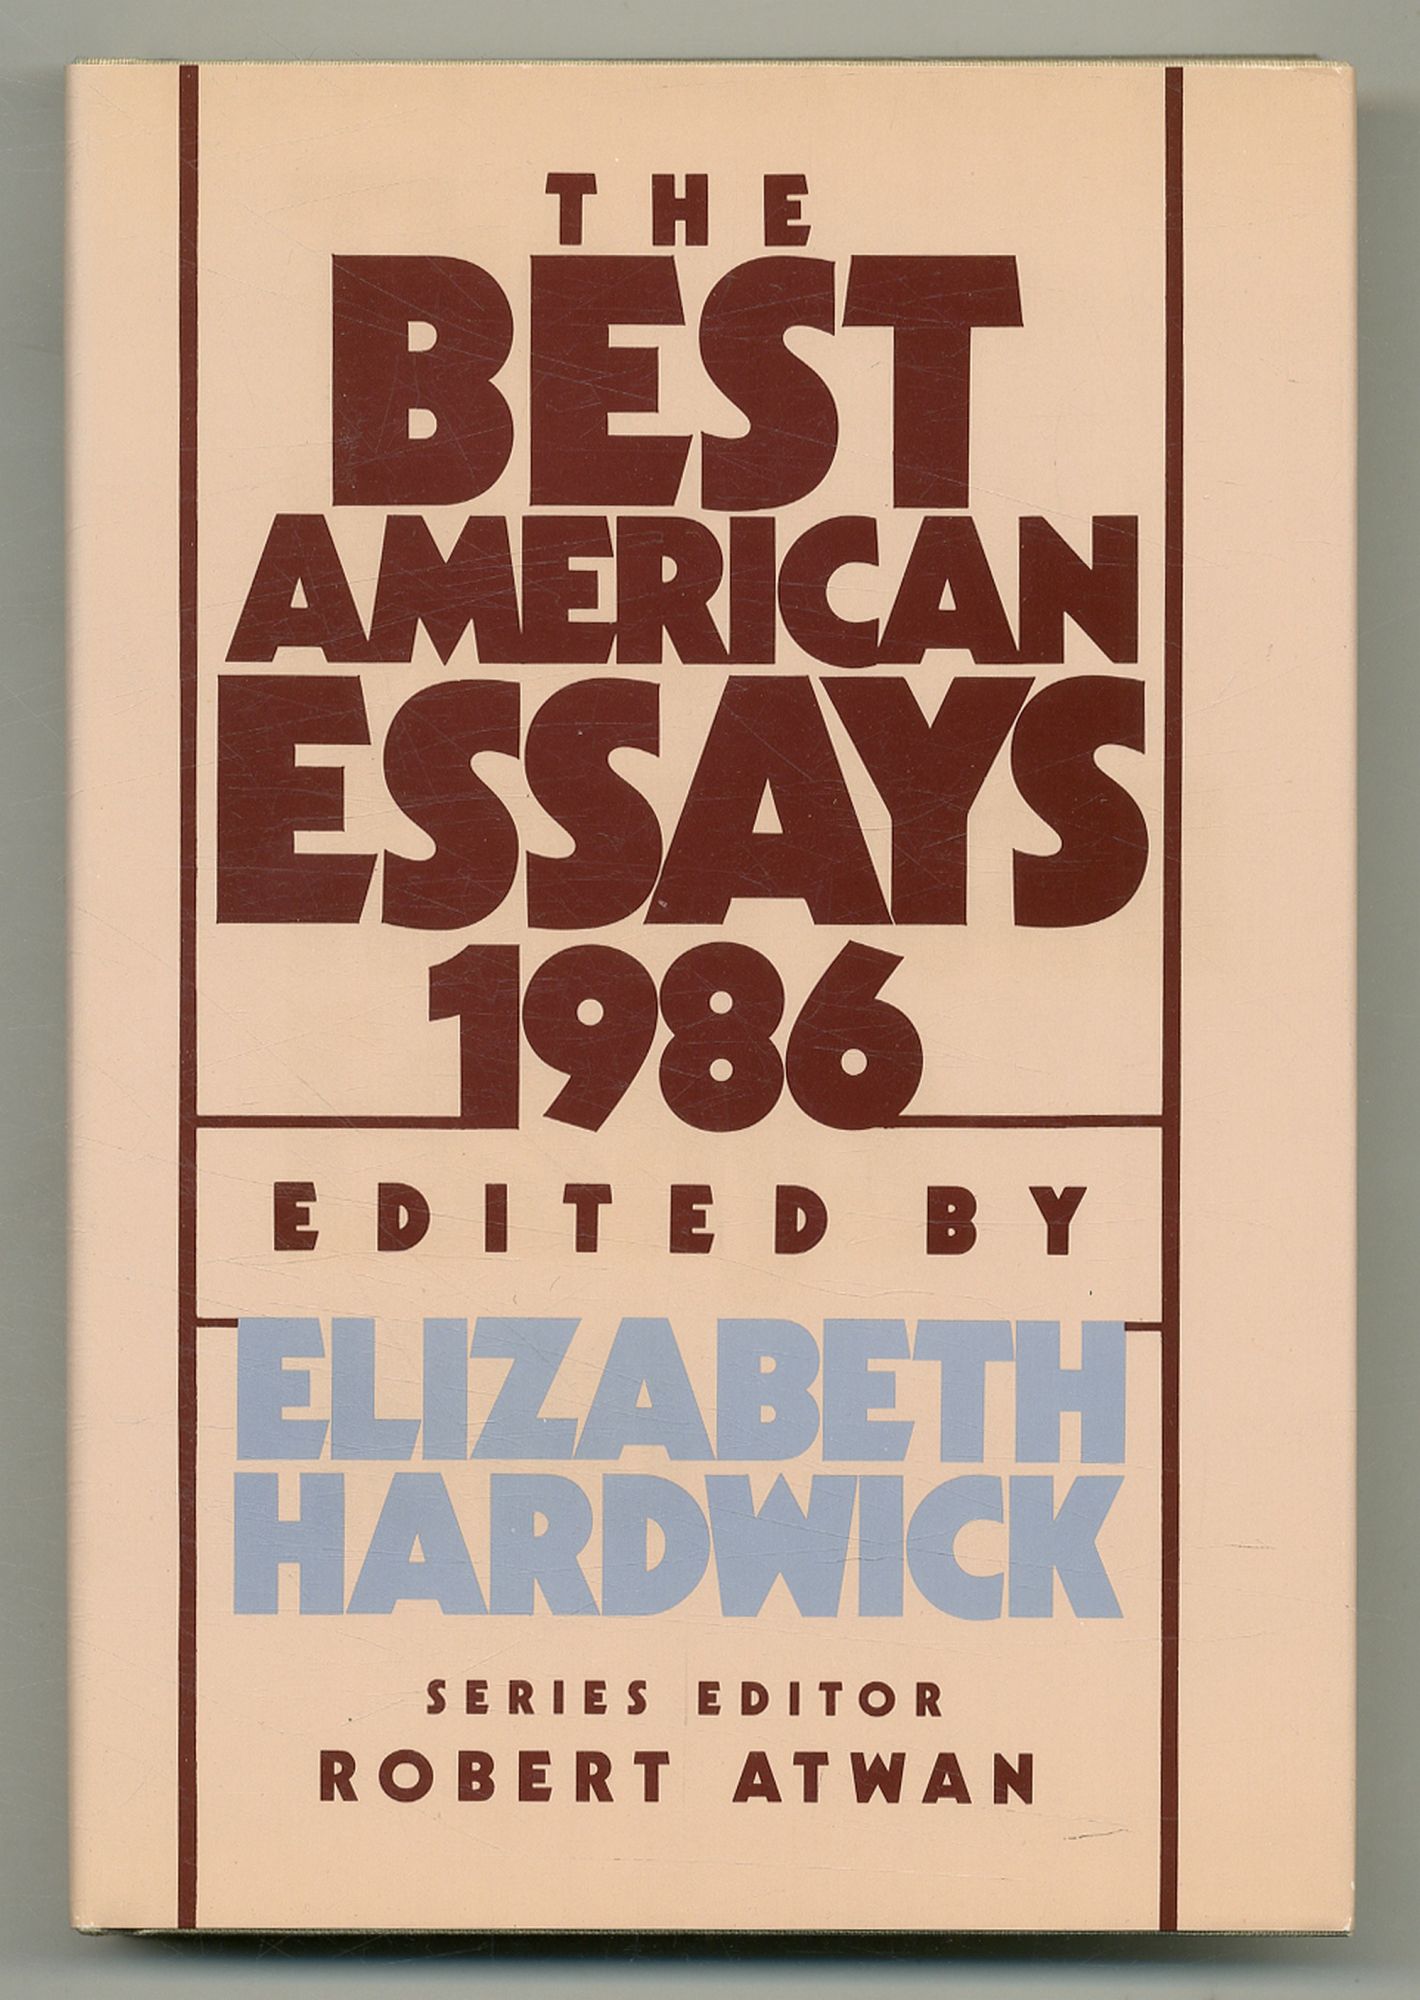 The Best American Essays 1986 - HARDWICK, Elizabeth, edited and with an introduction by